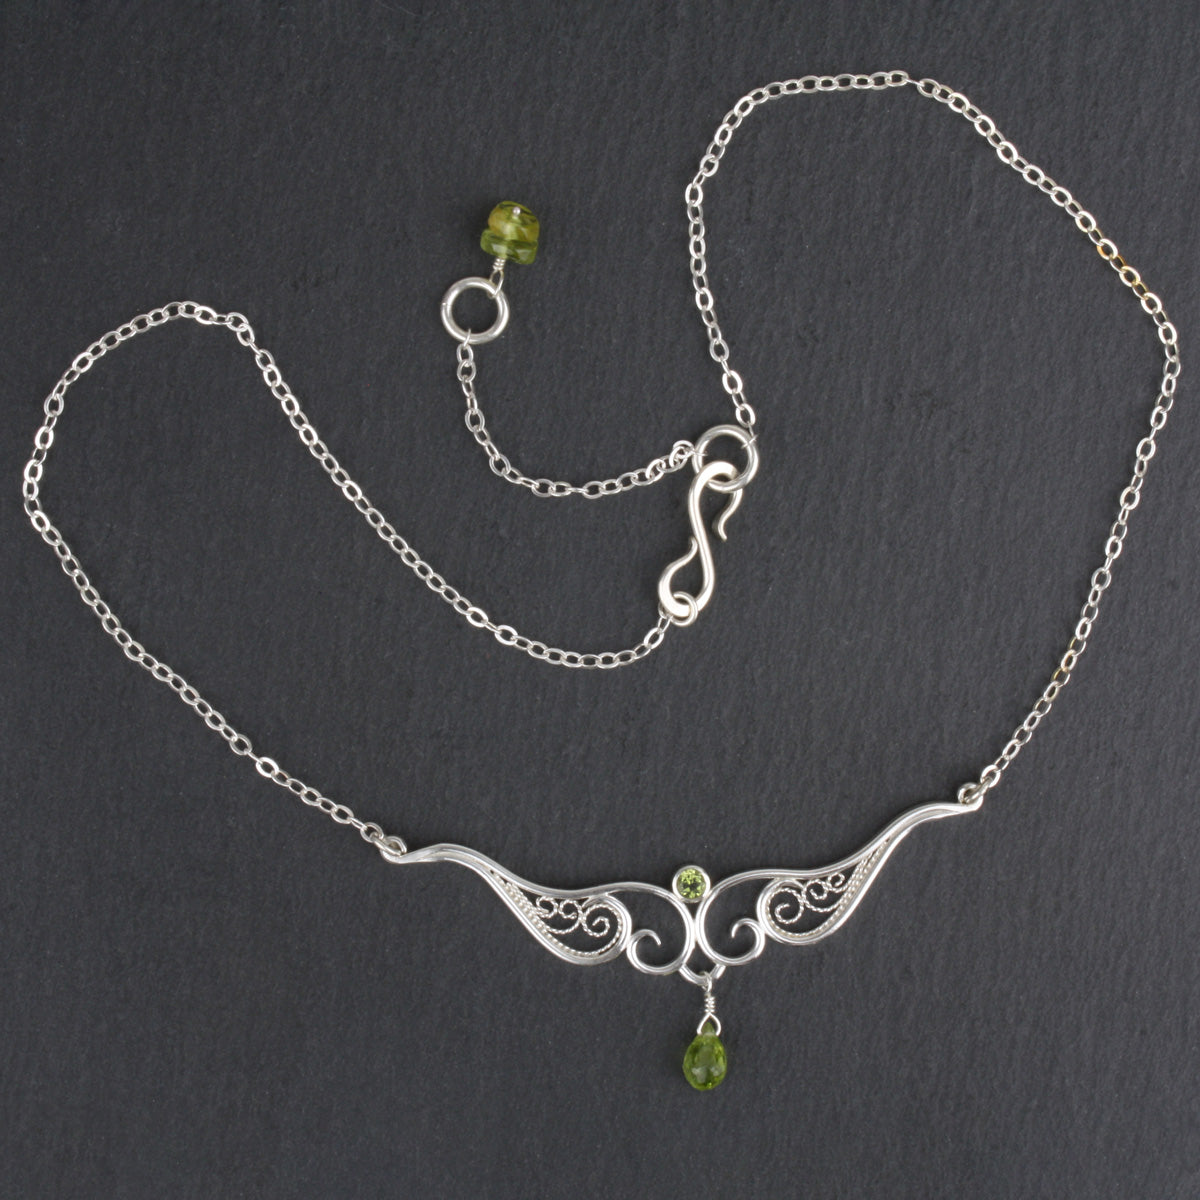 A graceful silver necklace with delicate filigree wirework, accented with green peridot, on a dark slate background.